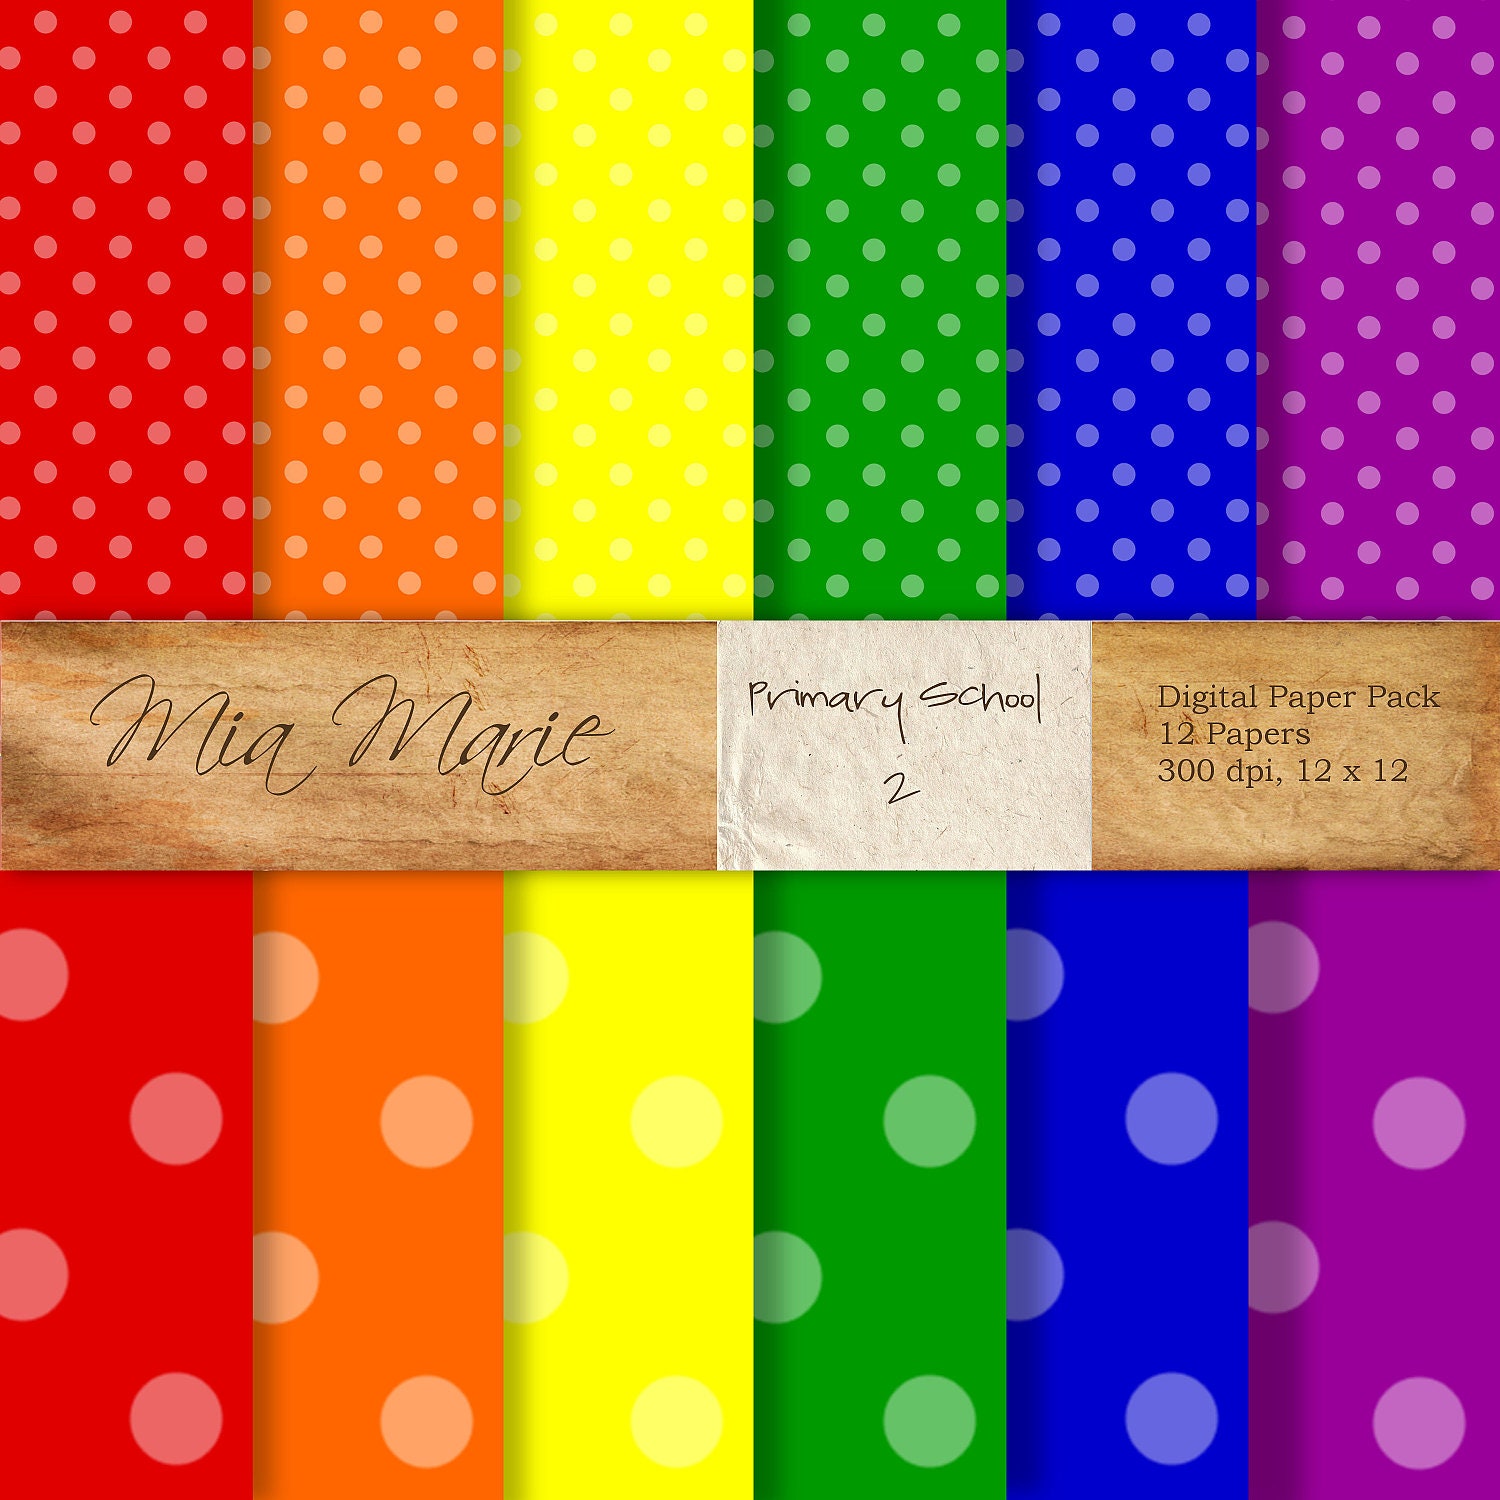 INSTANT DOWNLOAD - Digital Papers Scrapbooking Backgrounds Bright Primary Colors, Polka Dots ...